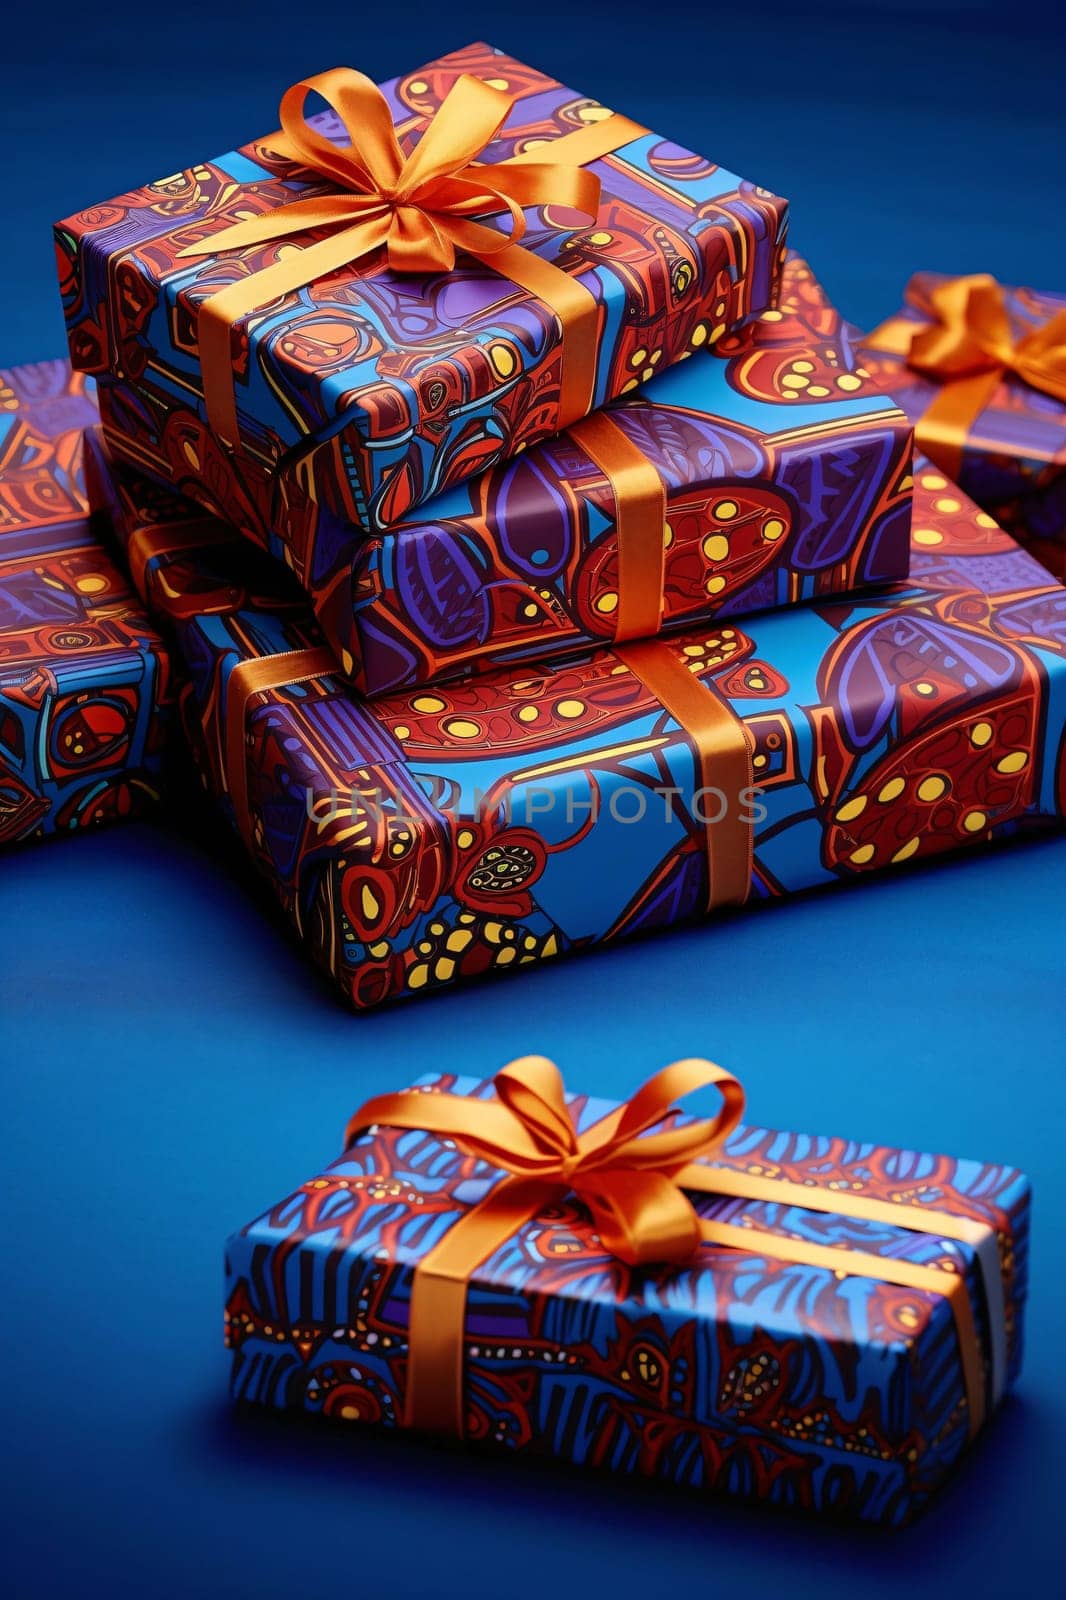 Blue boxes, gifts with red decorations, orange ribbons on a navy blue background. Gifts as a day symbol of present and love. A time of falling in love and love.